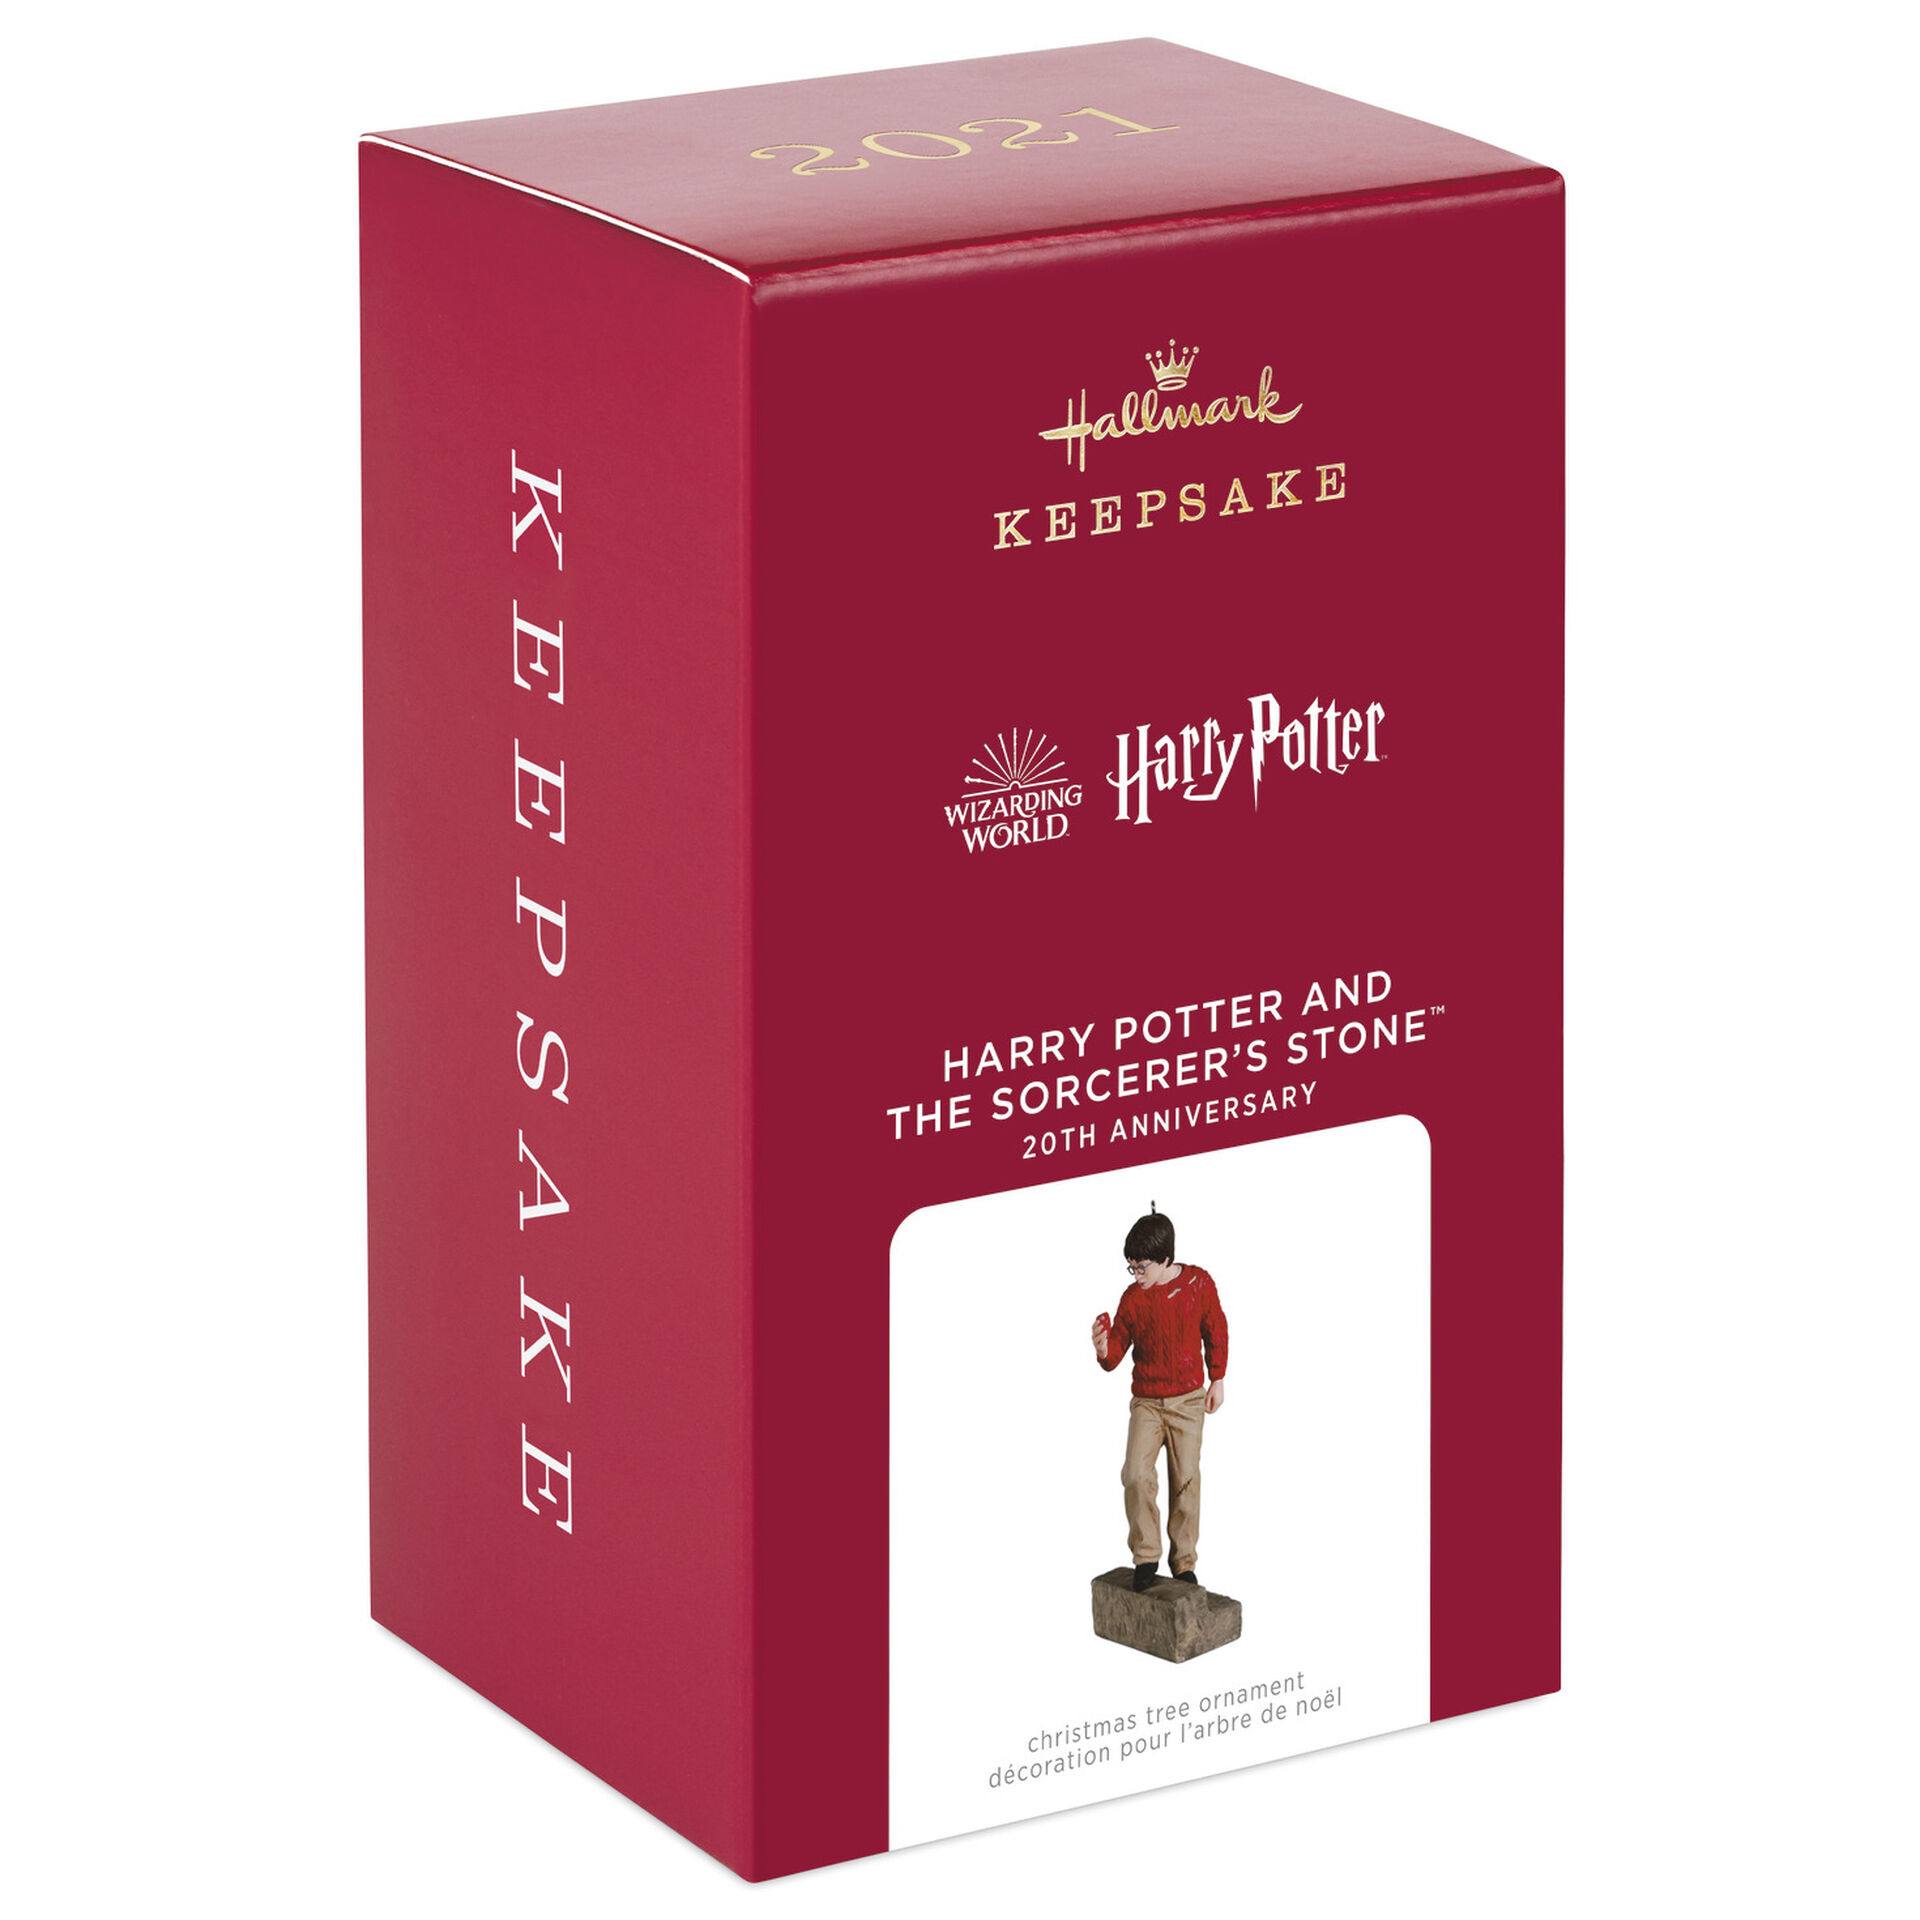 All Hallmark Harry Potter Ornaments • For The Love of Harry